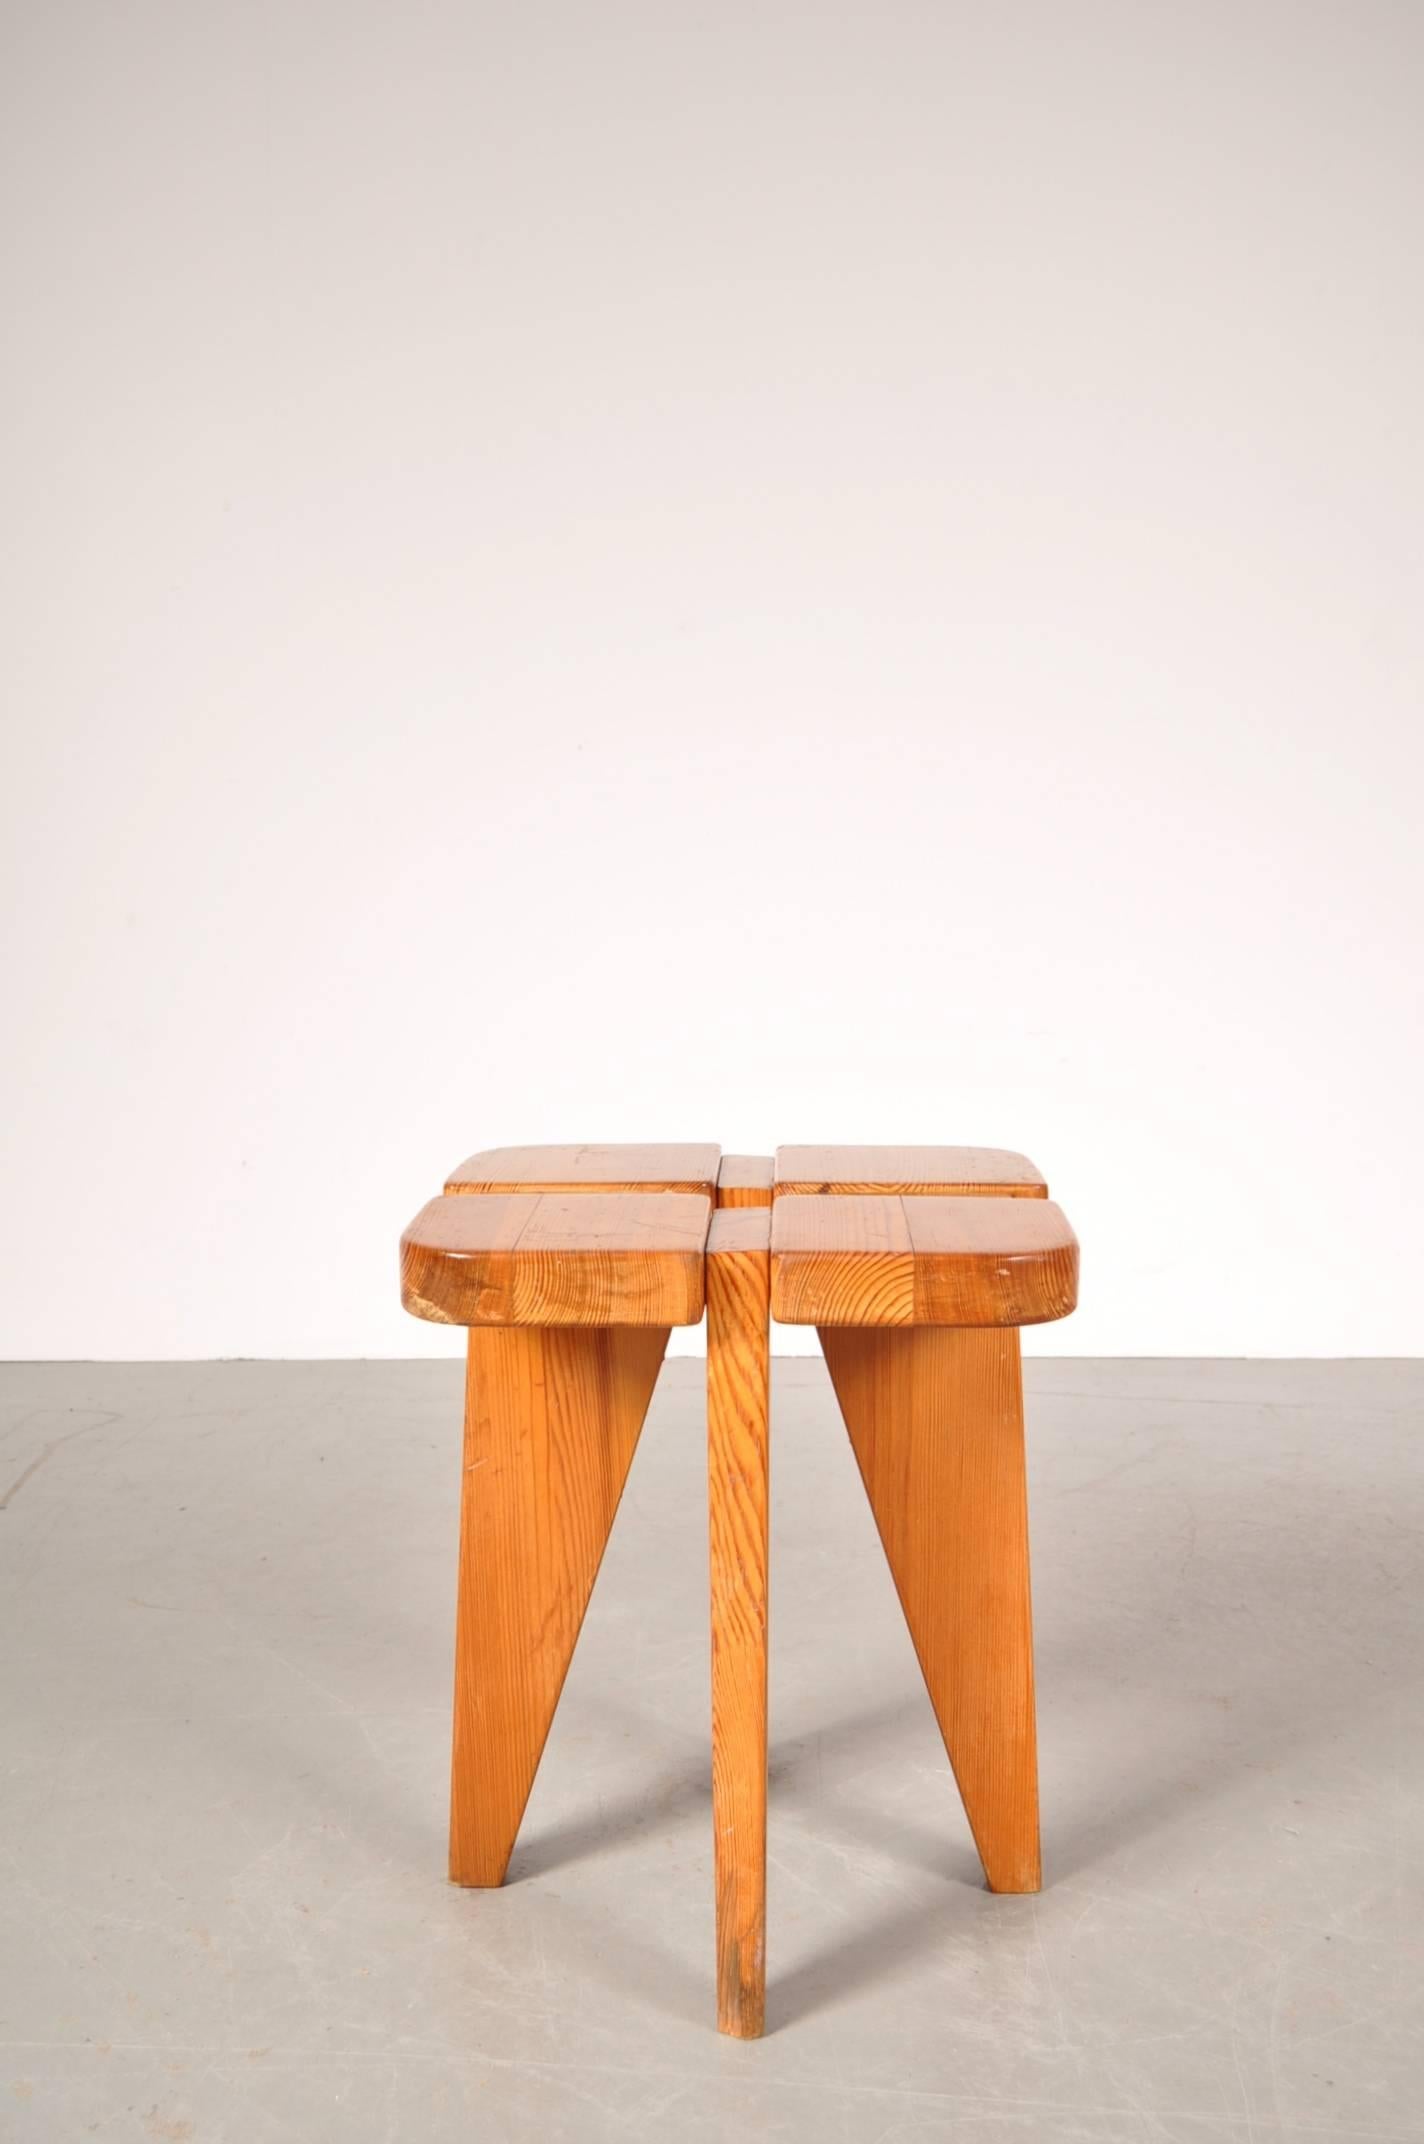 Lovely stool designed by Lisa Johansson-Pape, manufactured by Stockmann AB, Kervo Woodwork Factory in Helsinki, circa 1950.

This very recognizable piece is completely made of beautiful quality pine wood. It has a well designed structure crafted